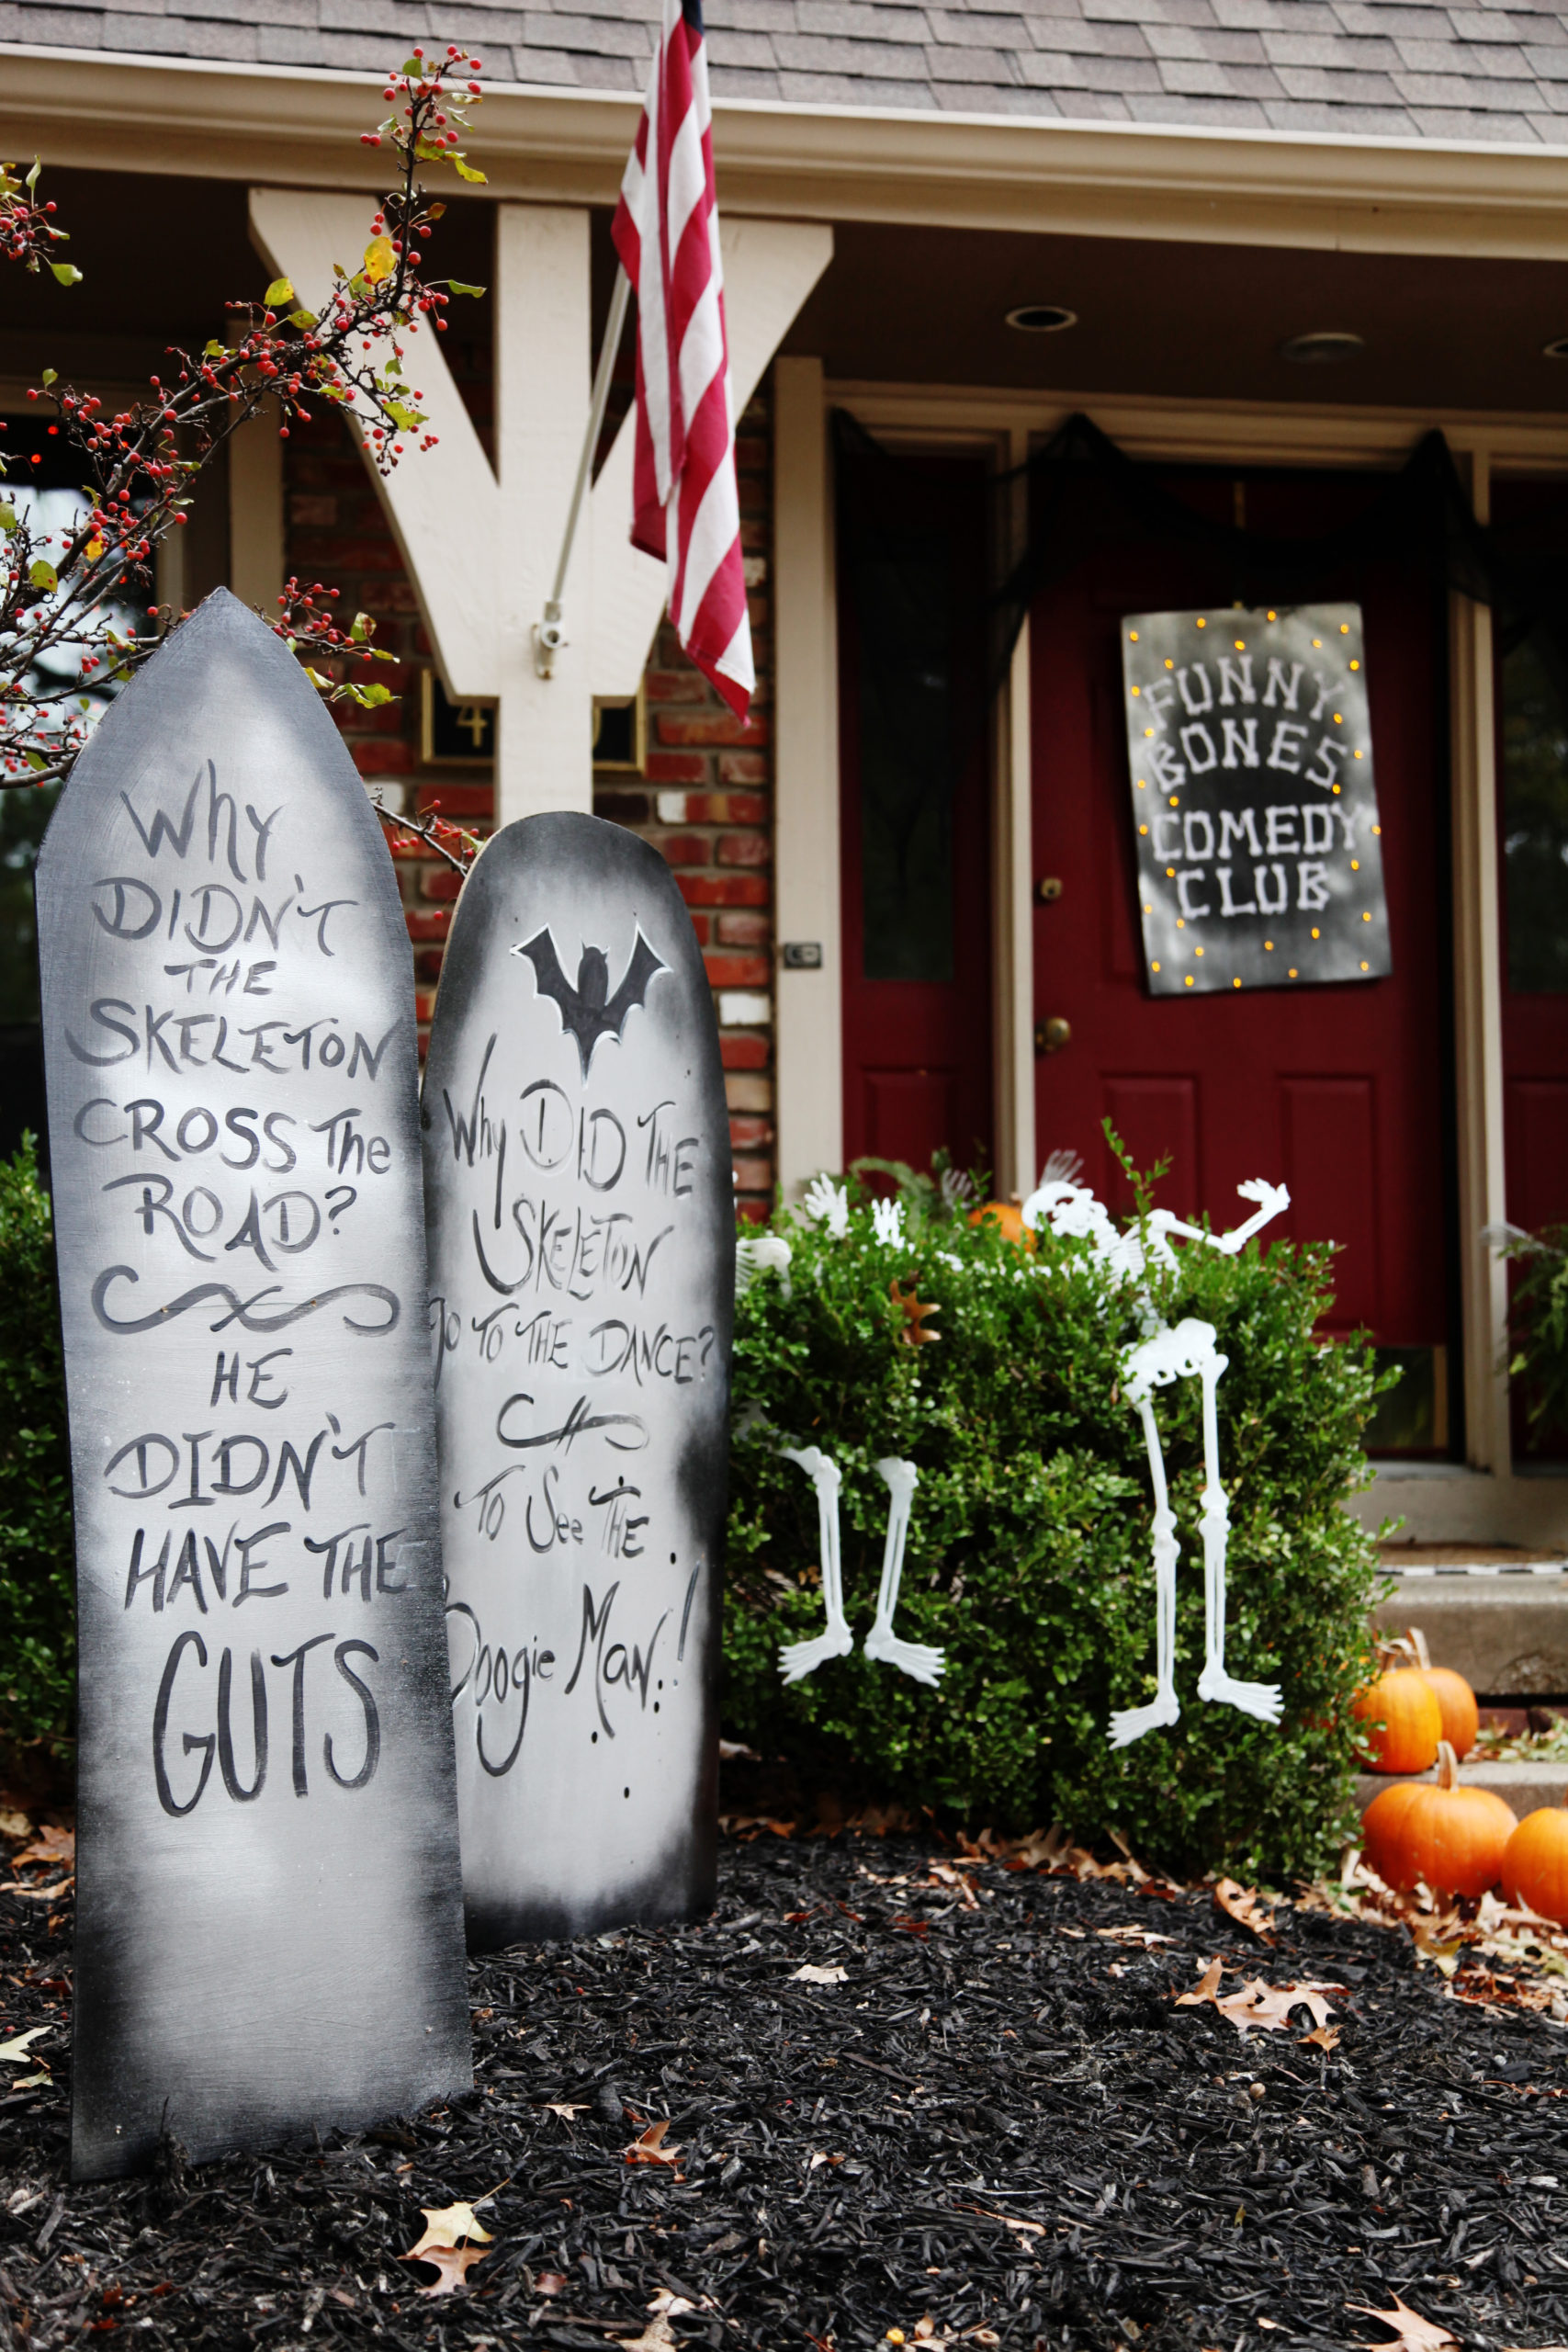 Funny Bones Comedy Club Halloween Theme Front Porch Decorations